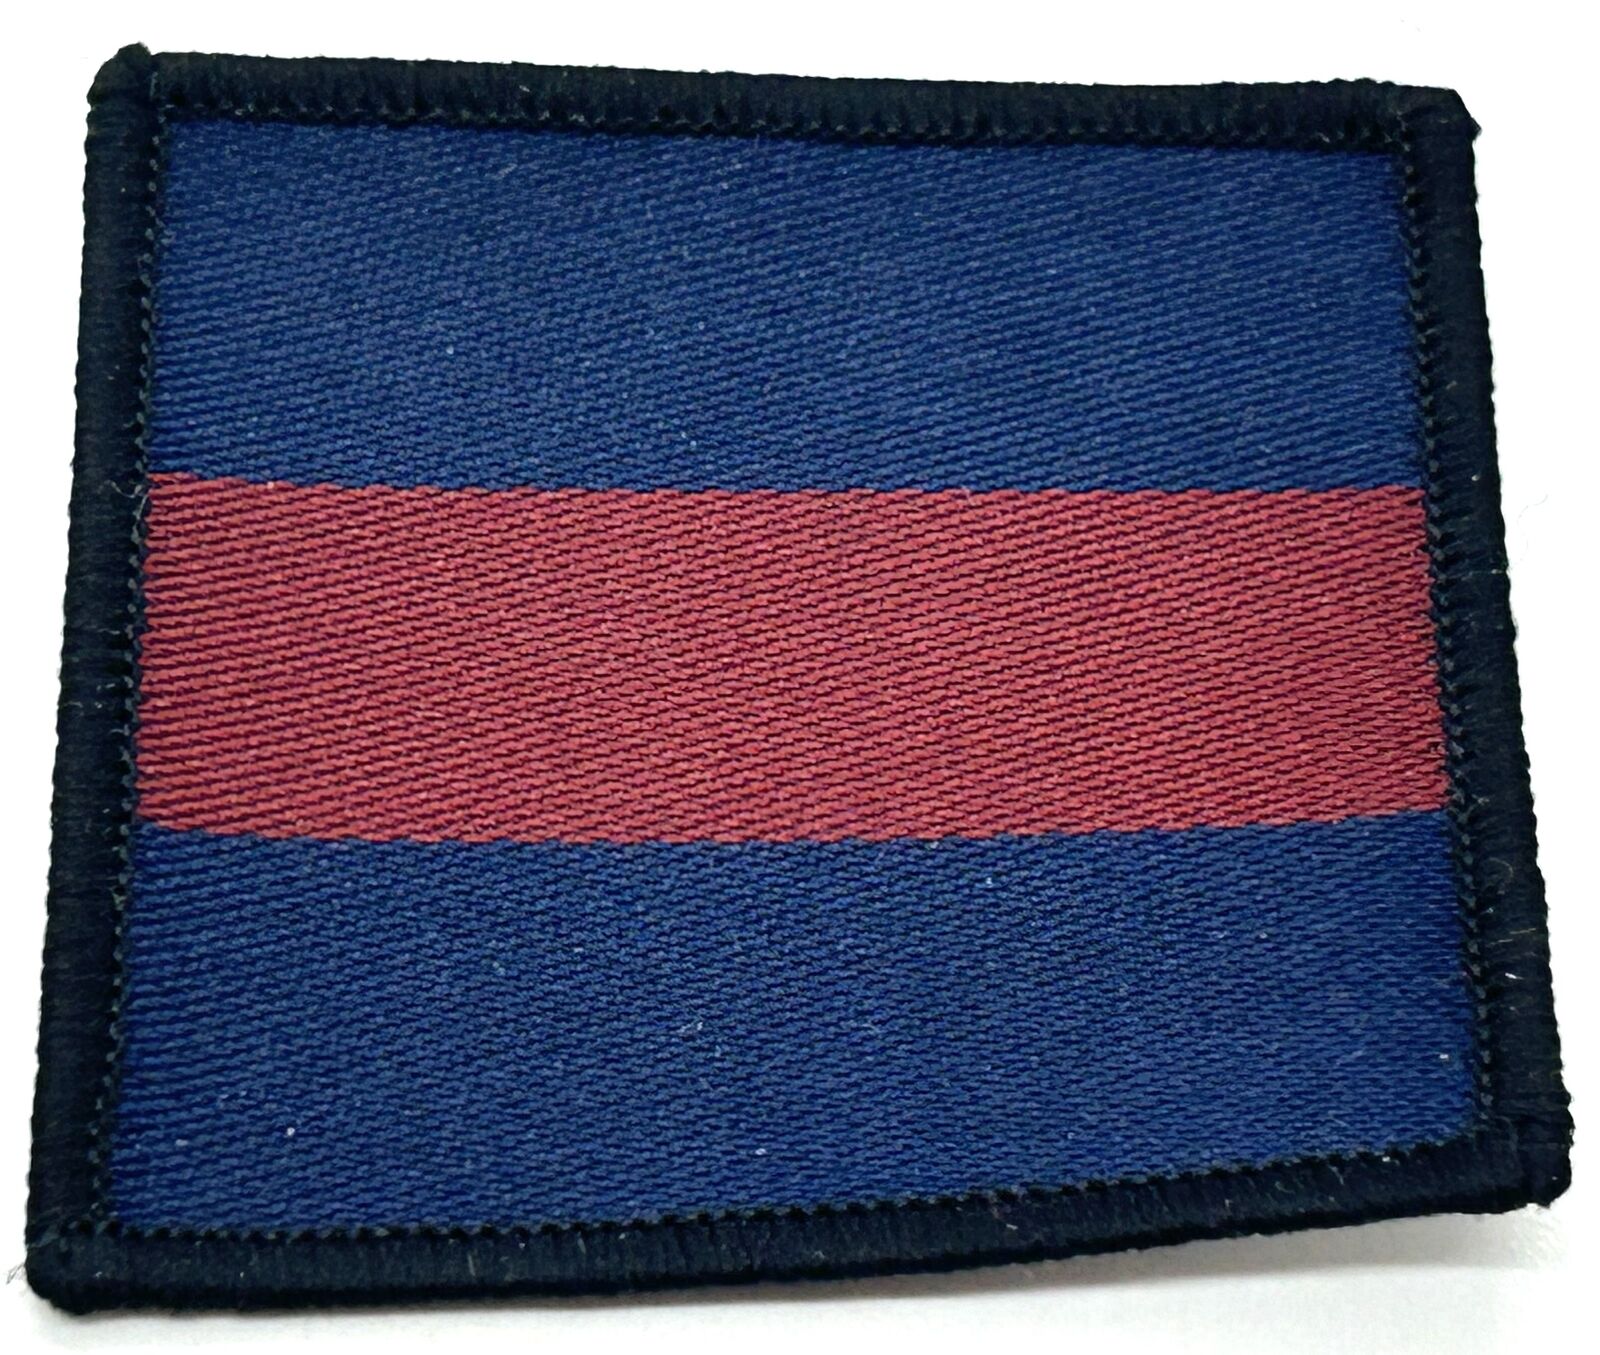 British Military Issue Foot Guards Division TRF Uniform Patch